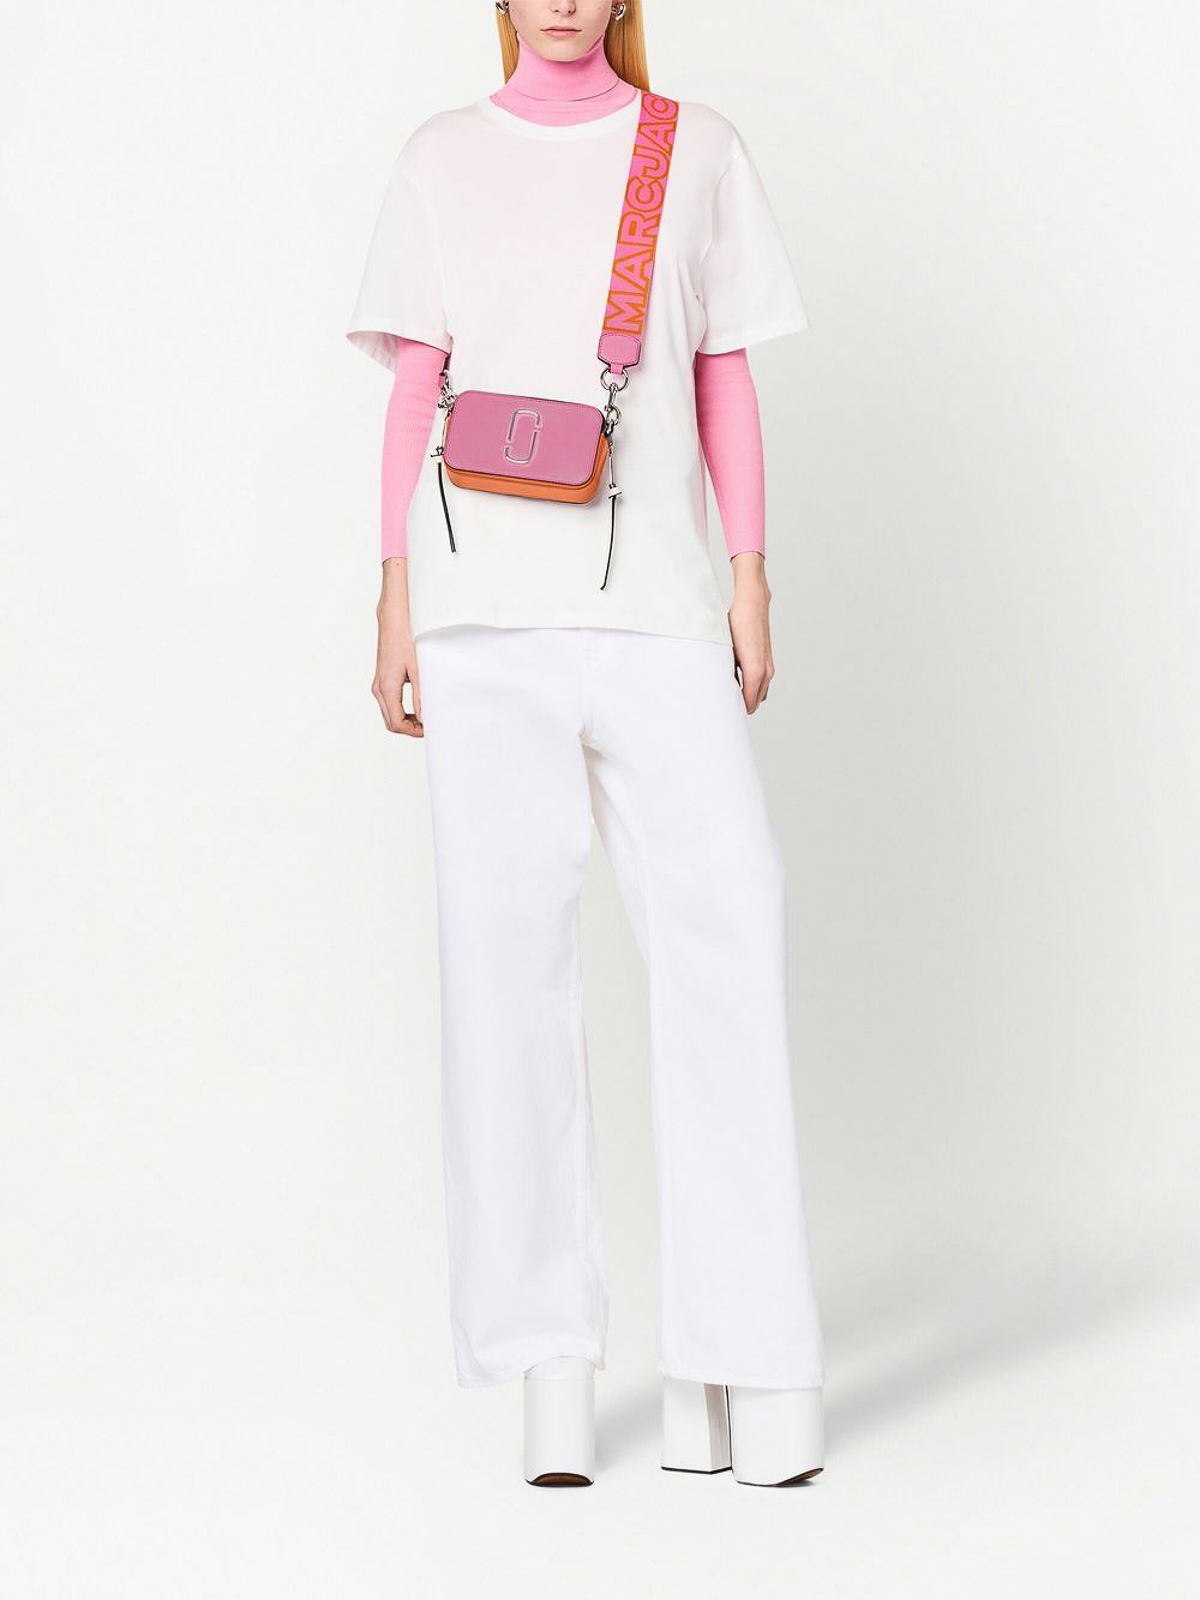 MARC JACOBS: crossbody bags for woman - White  Marc Jacobs crossbody bags  2S3HCR500H03 online at